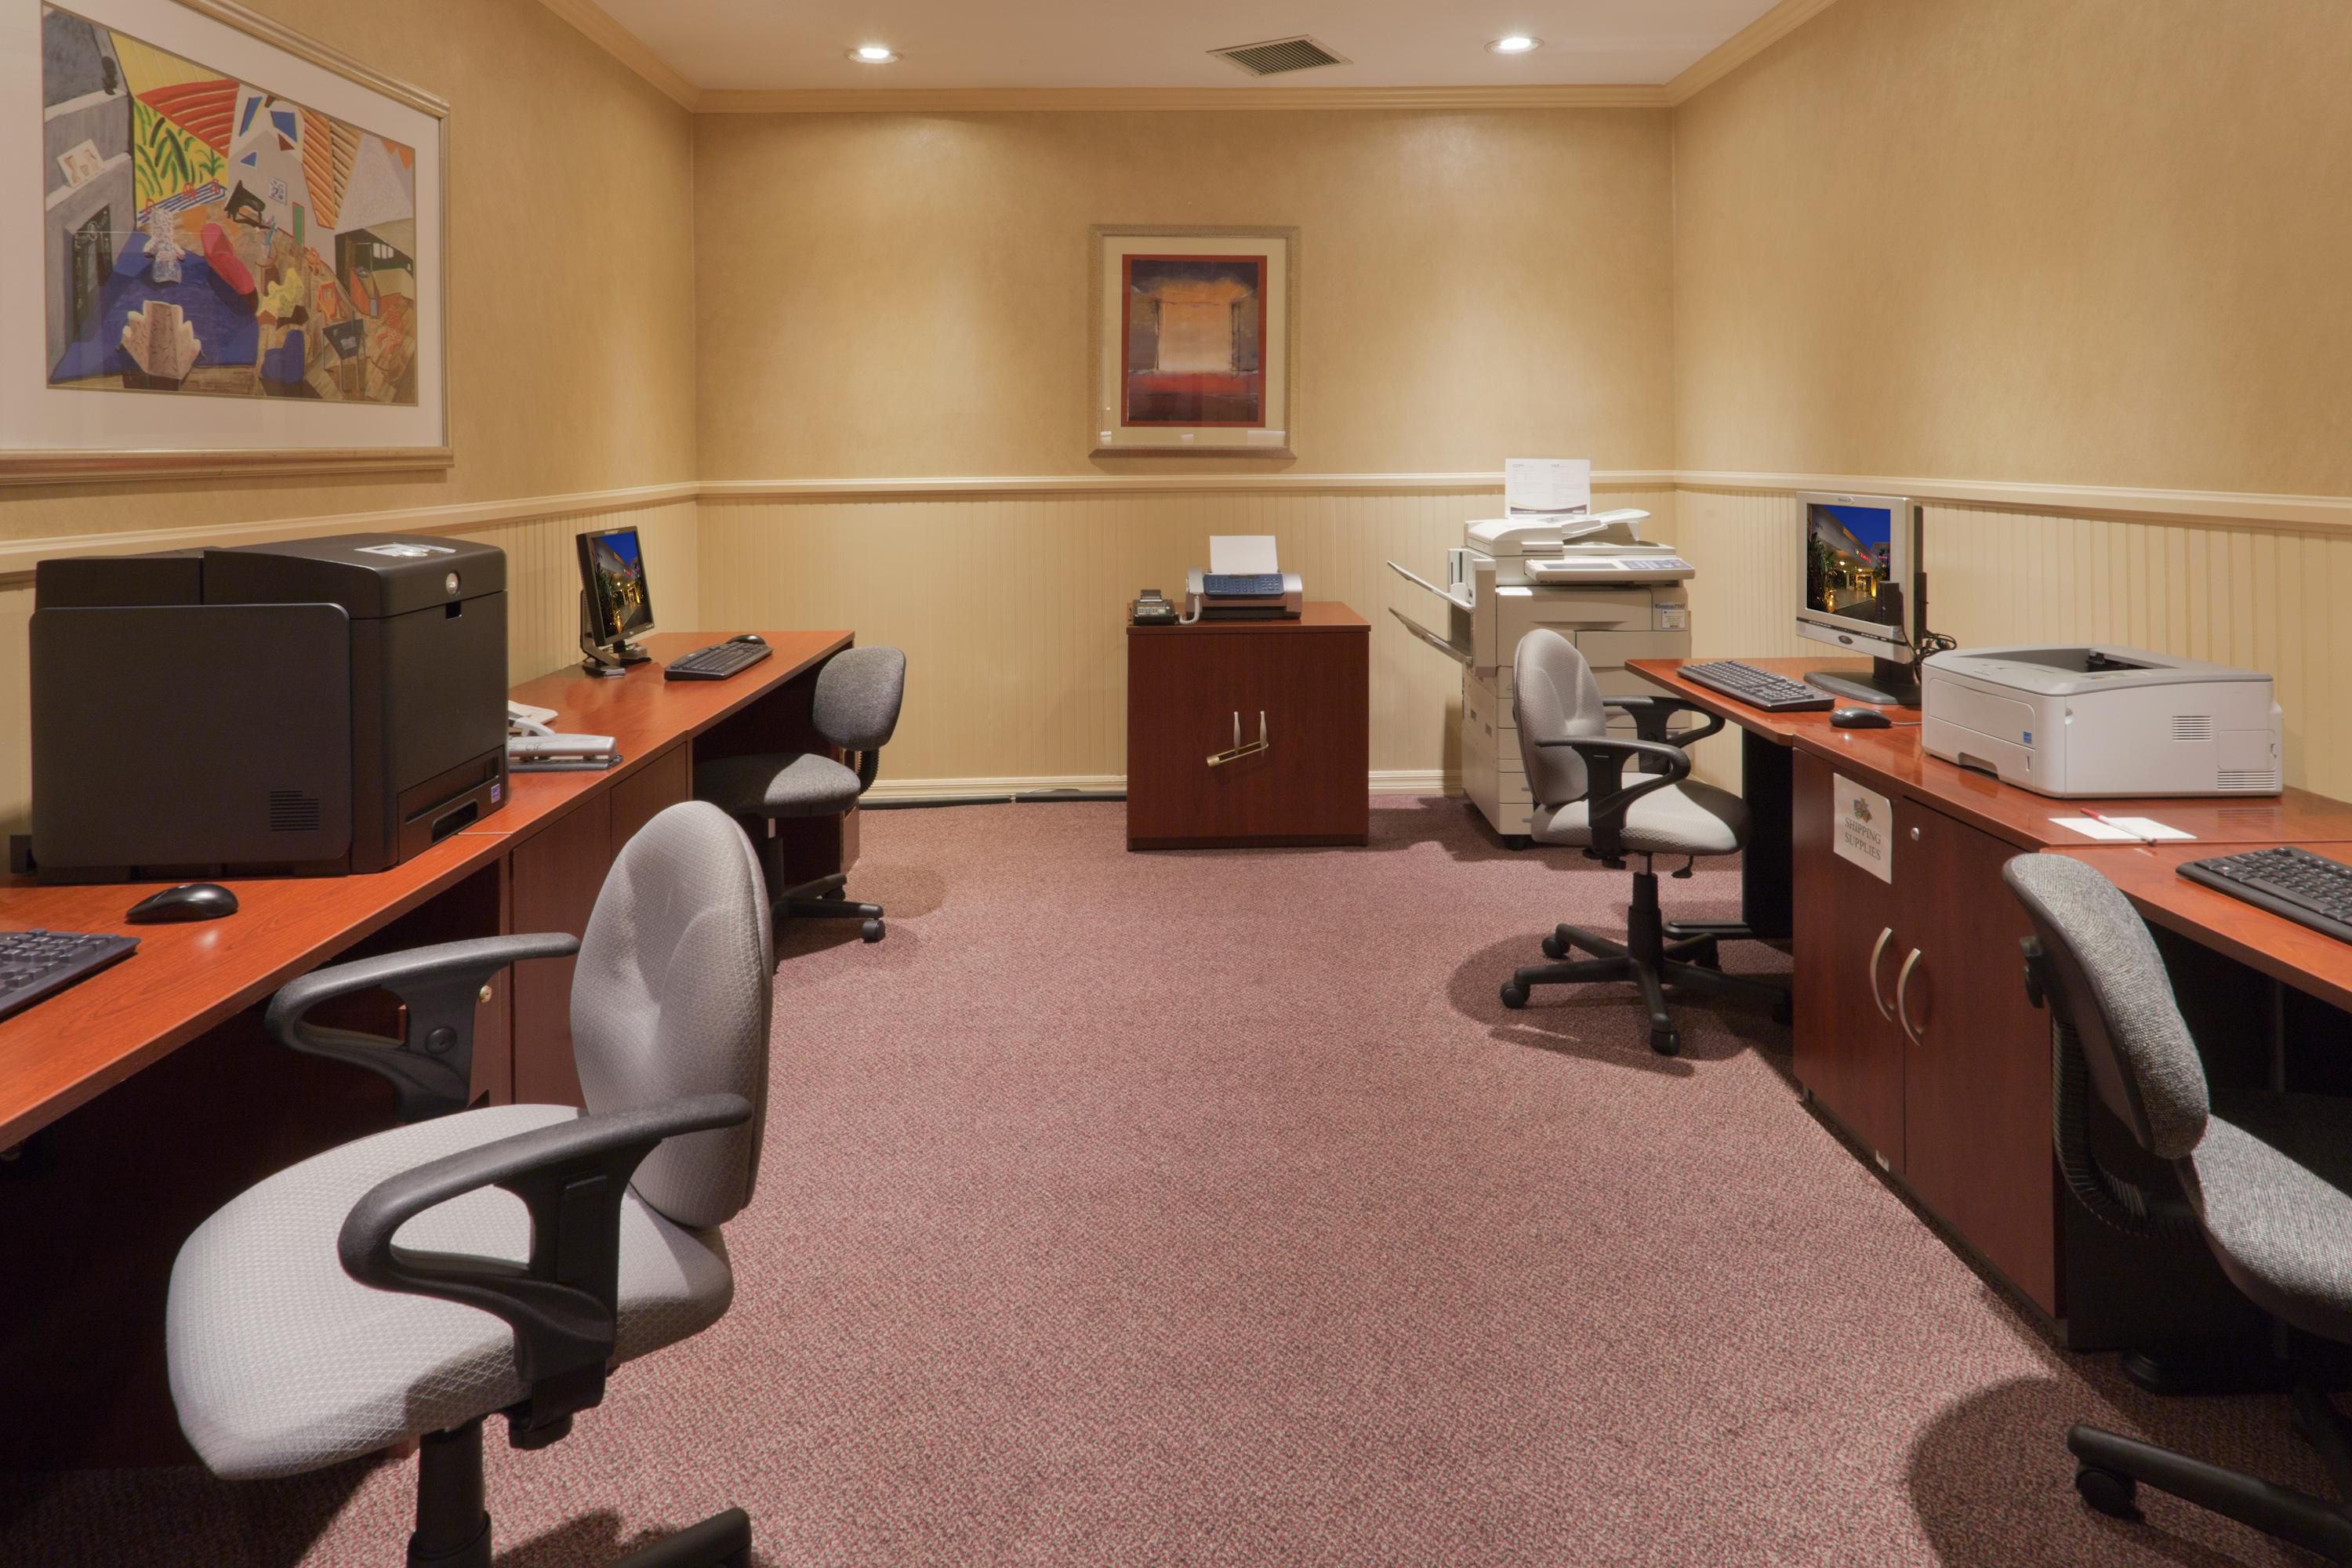 Our 24 hour business center keeps you functioning on the road